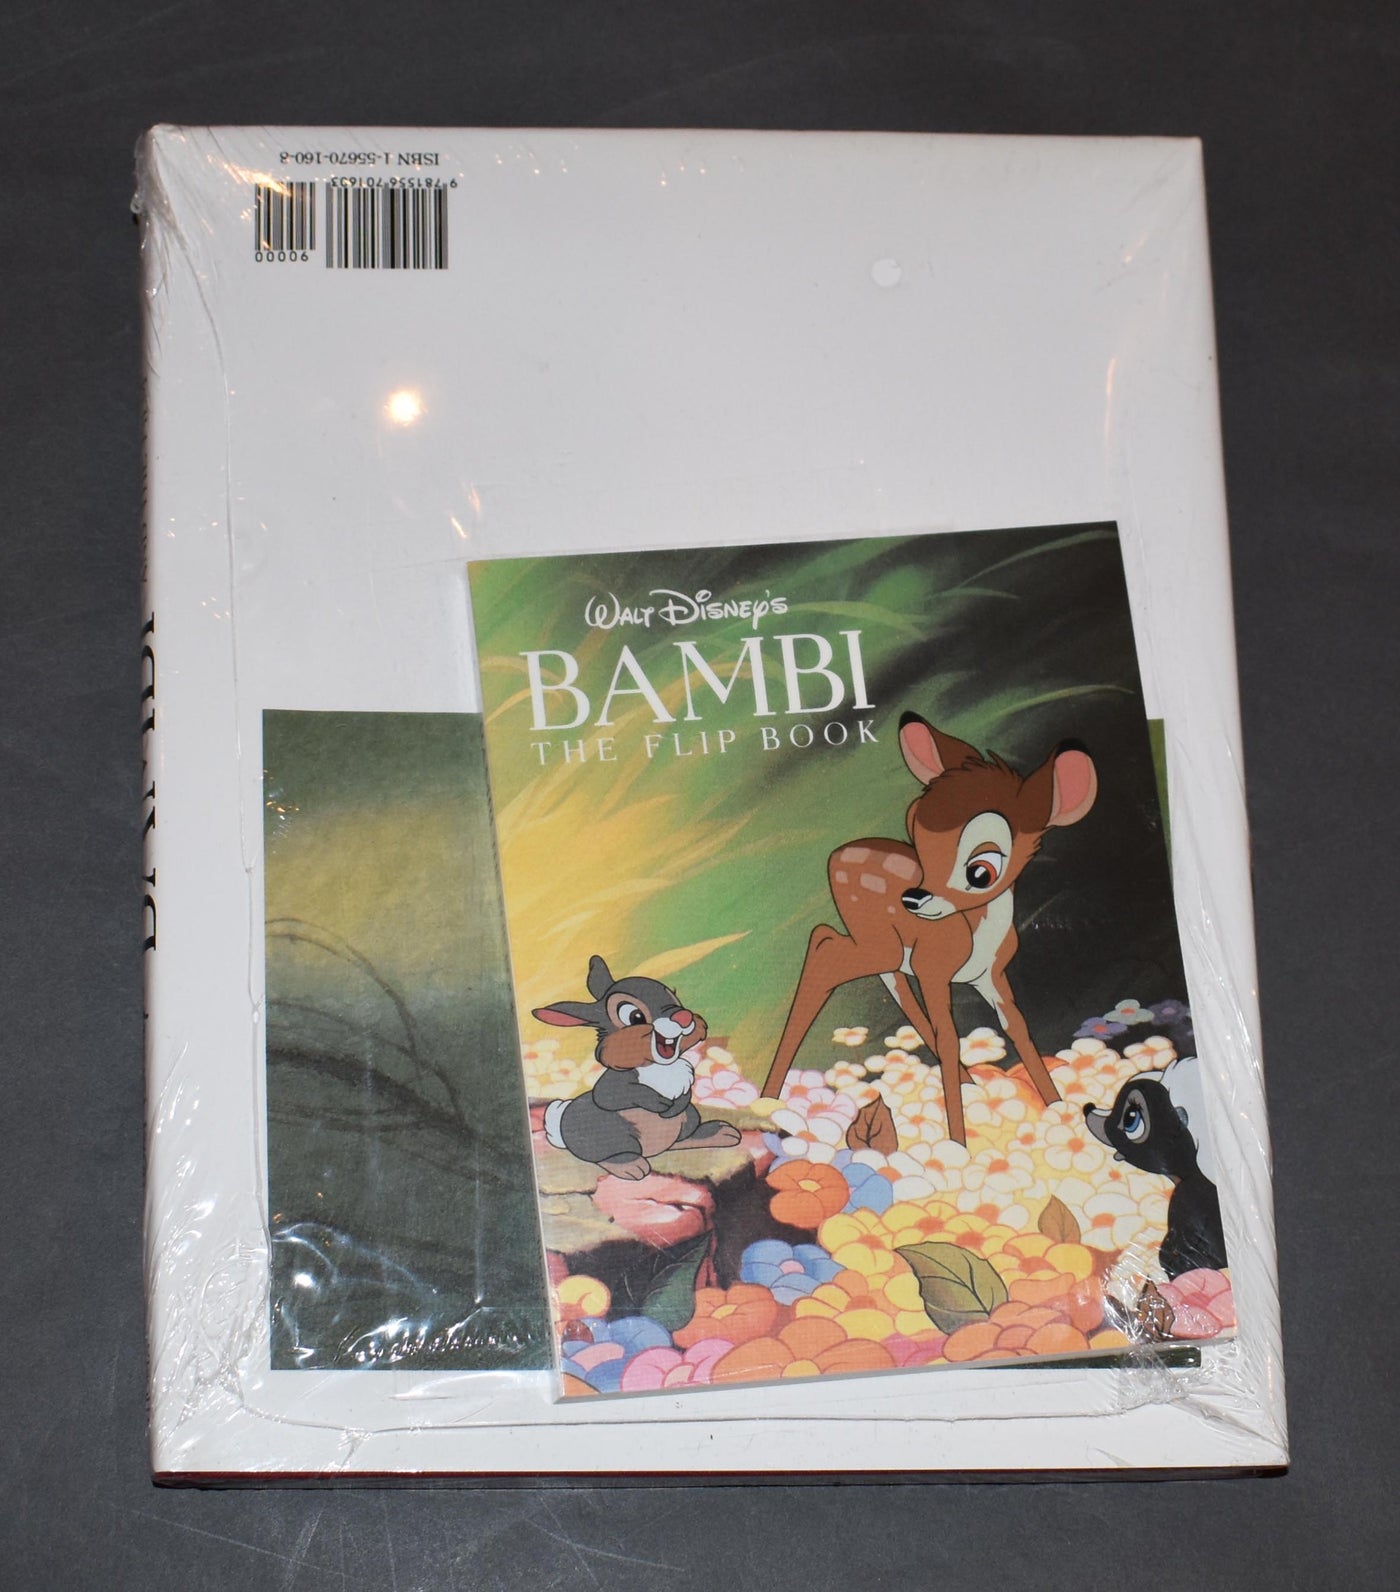 Original Walt Disney's Bambi: Story and the Film Book and Flipbook by Ollie Johnston and Frank Thomas (Shrink wrapped)